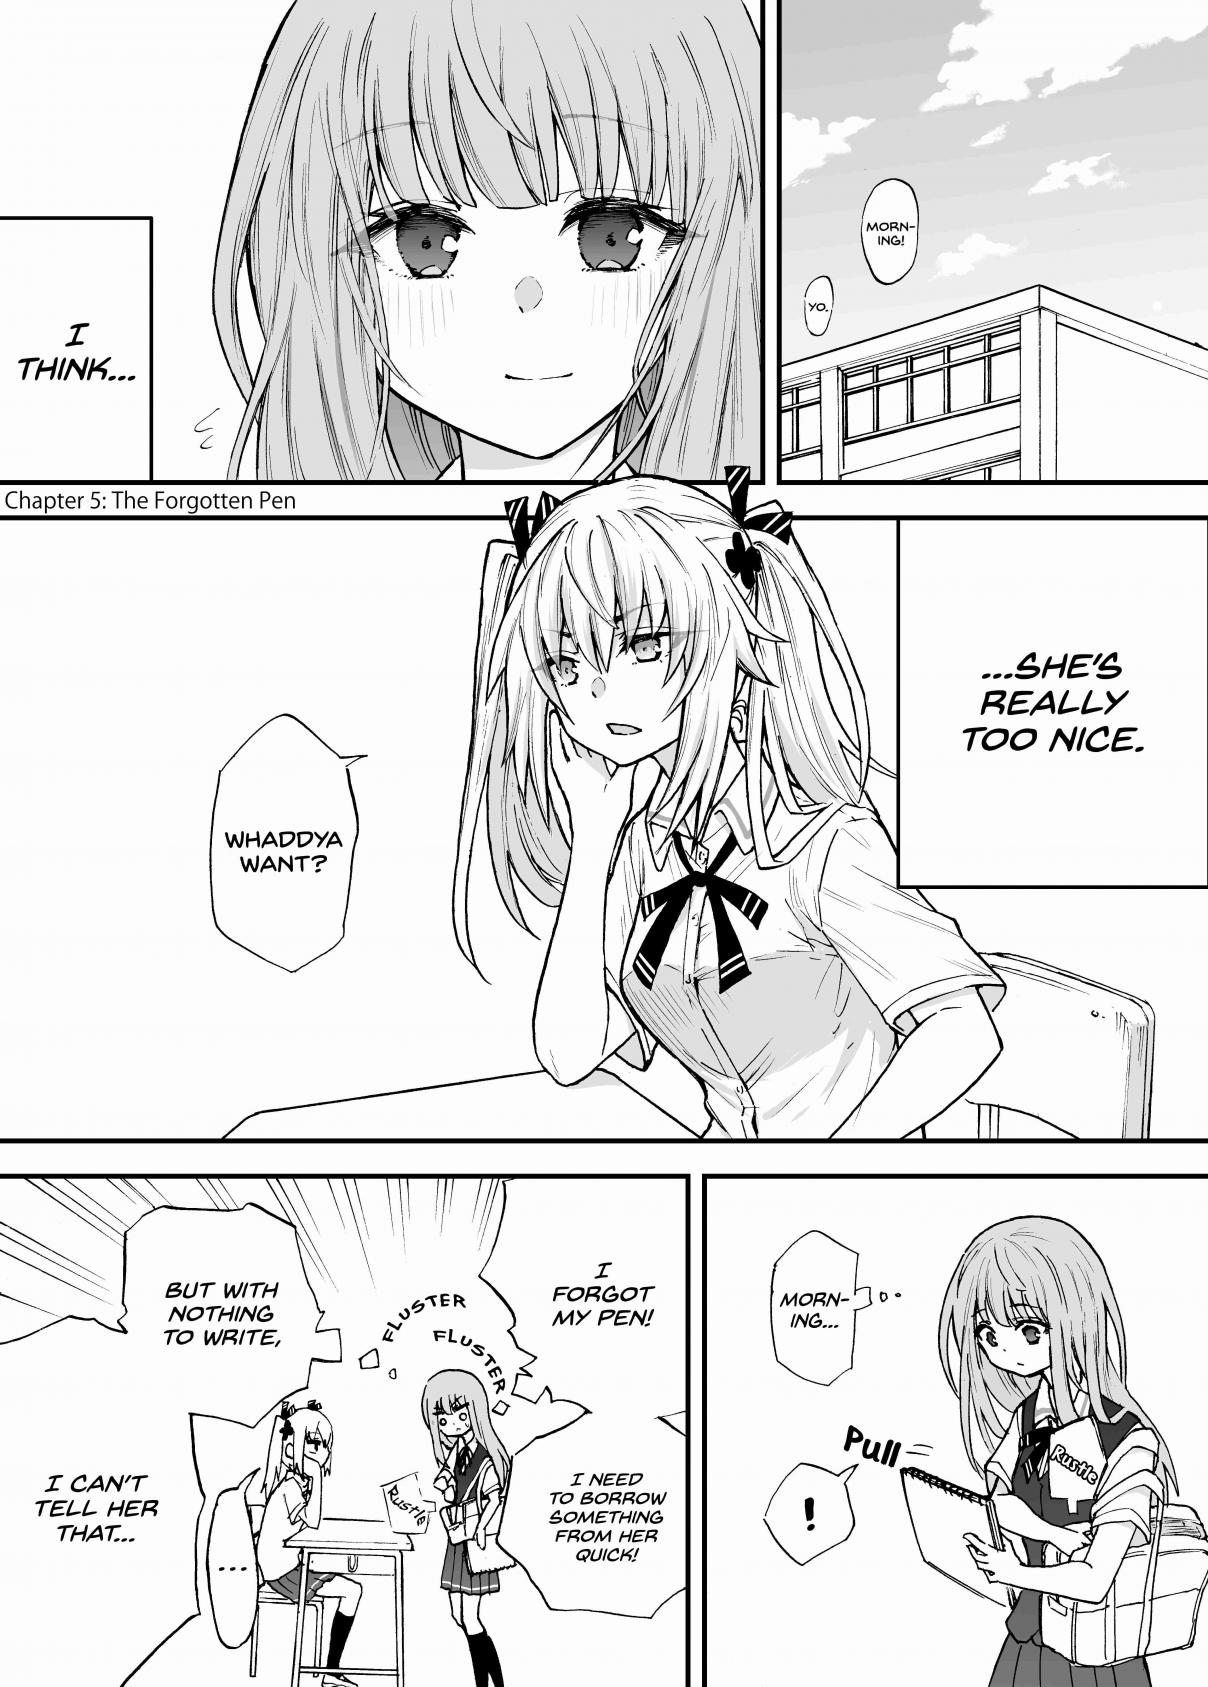 The Mute Girl and Her New Friend (Webcomic) Ch. 5 The Forgotten Pen